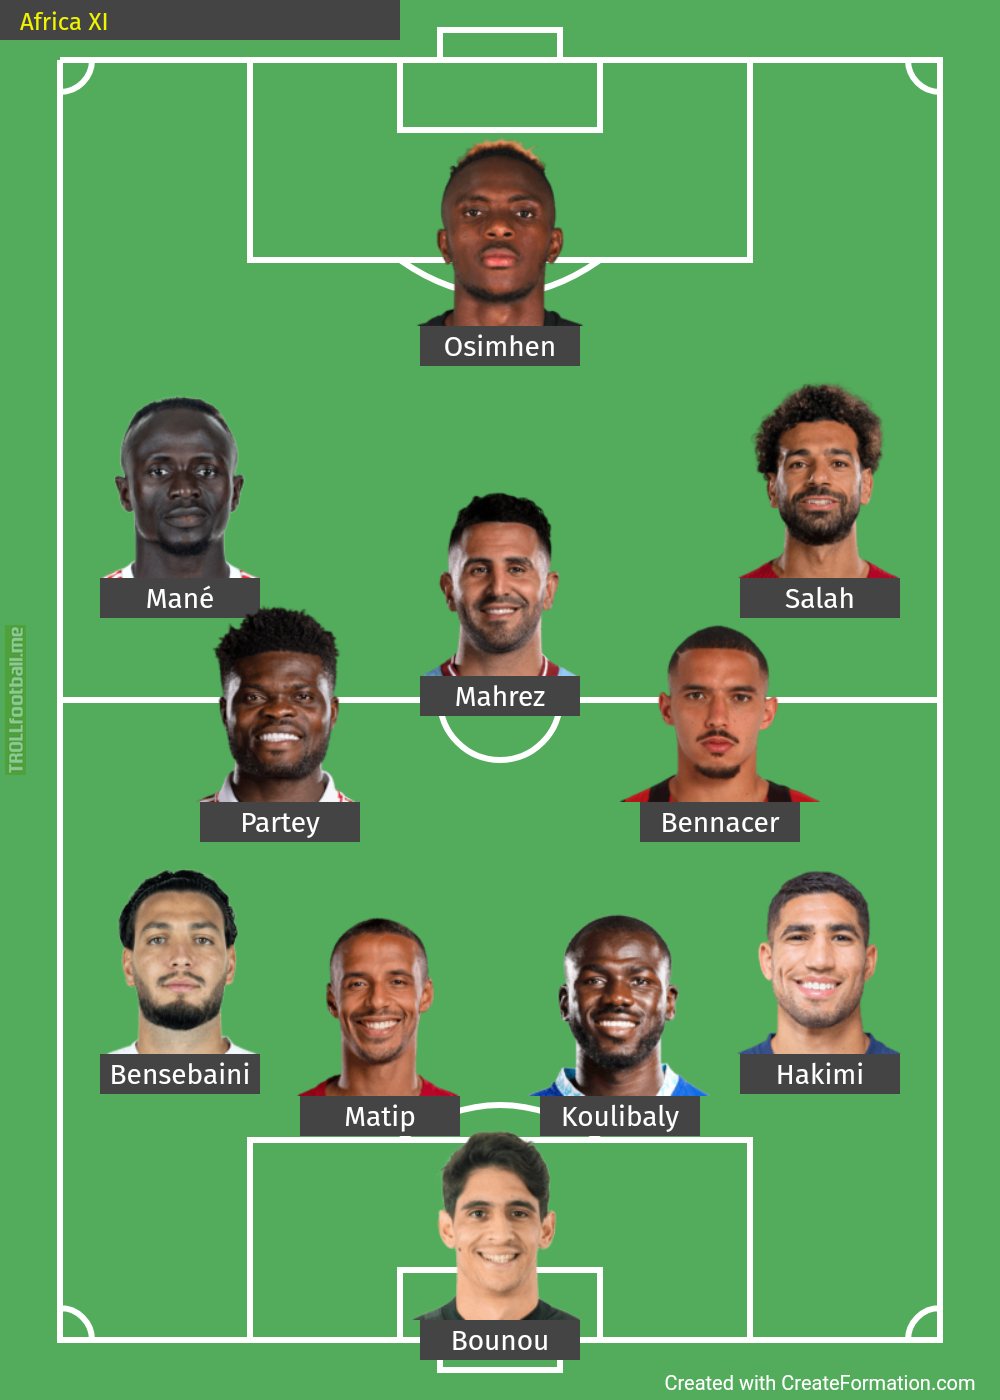 Africa XI, Any suggestions?